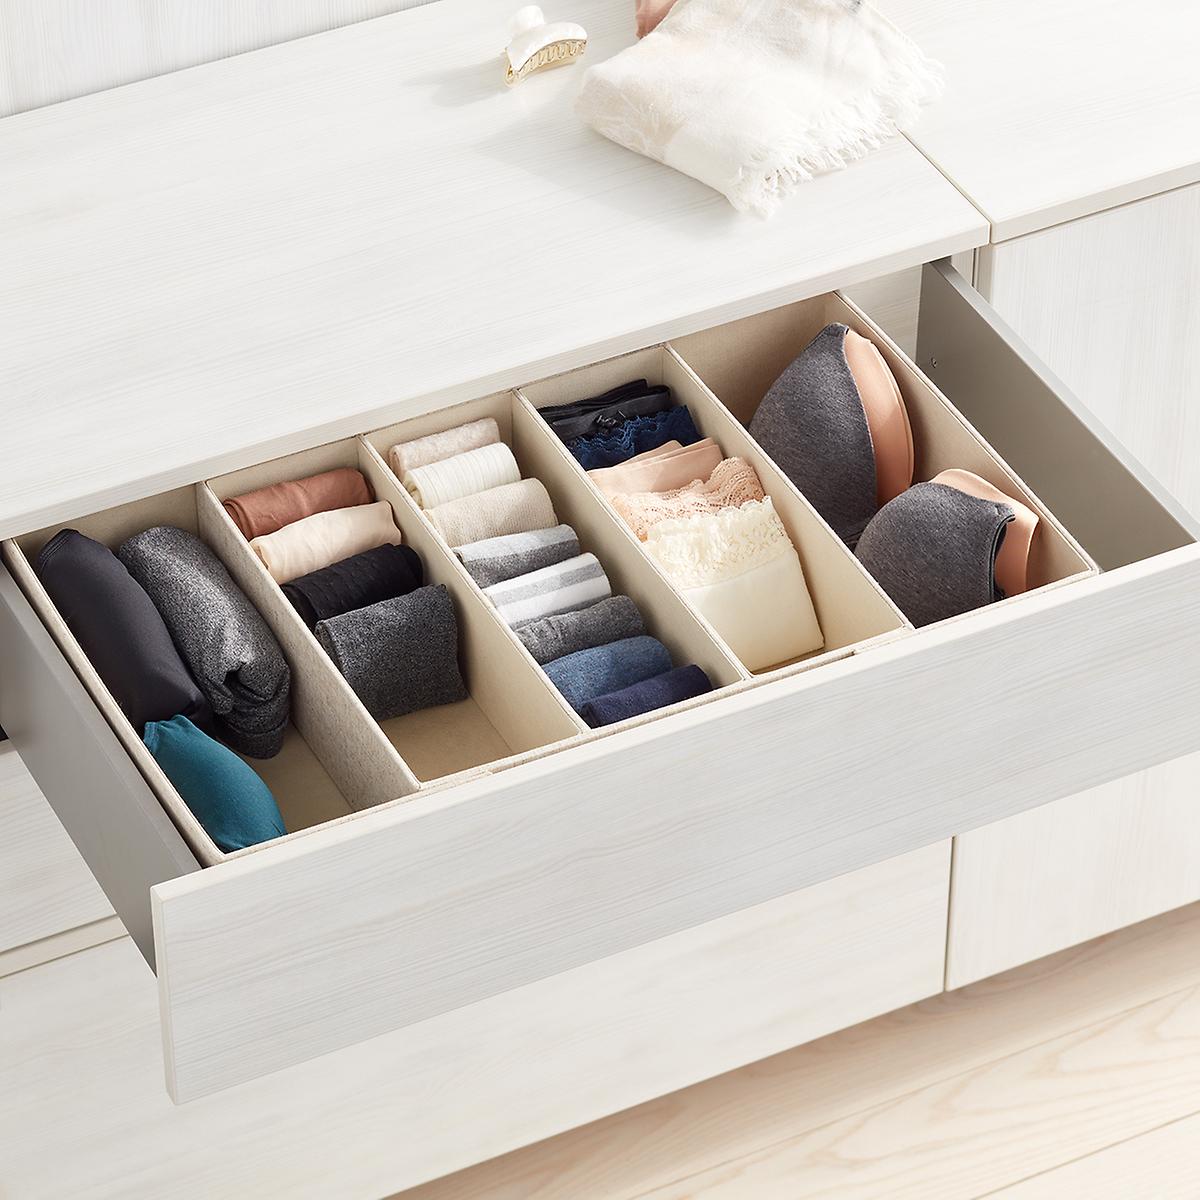 Cambridge 5-Section Expandable Drawer Organizers | The Container Store